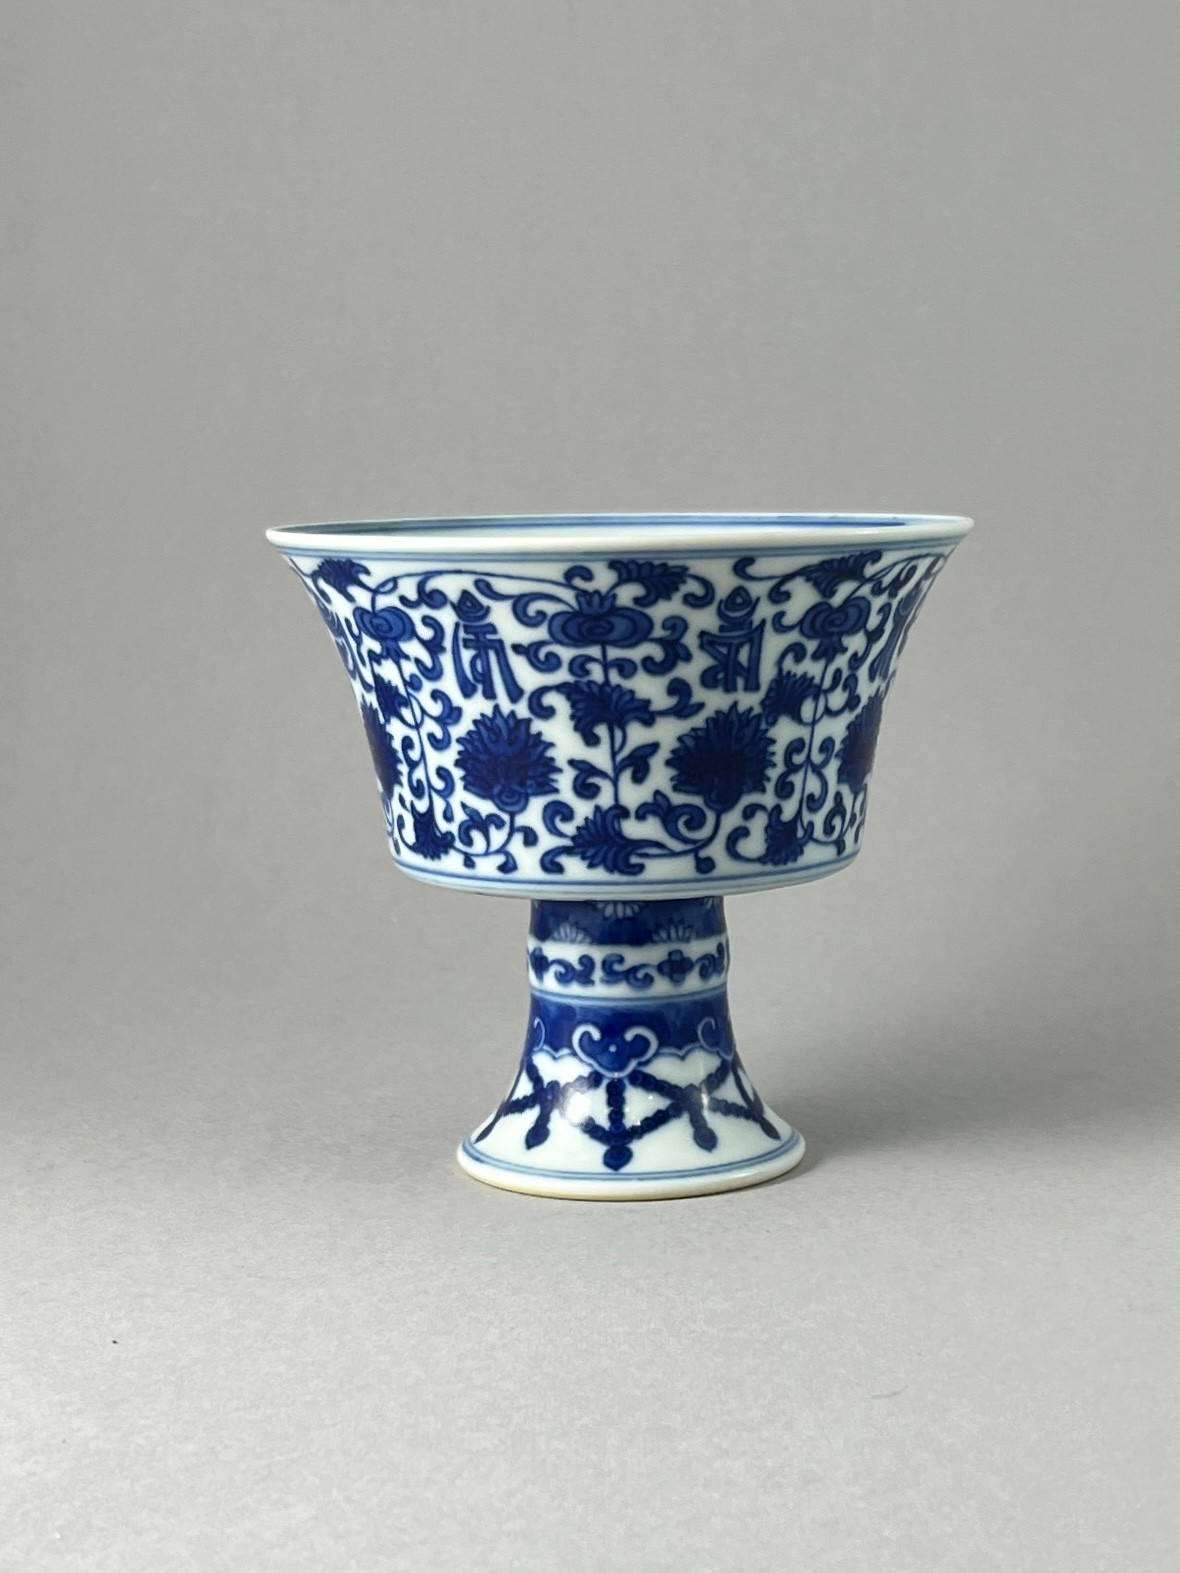 A Blue and White Stembowl, six character mark of Qianlong W:12.6cm well painted in Ming style,